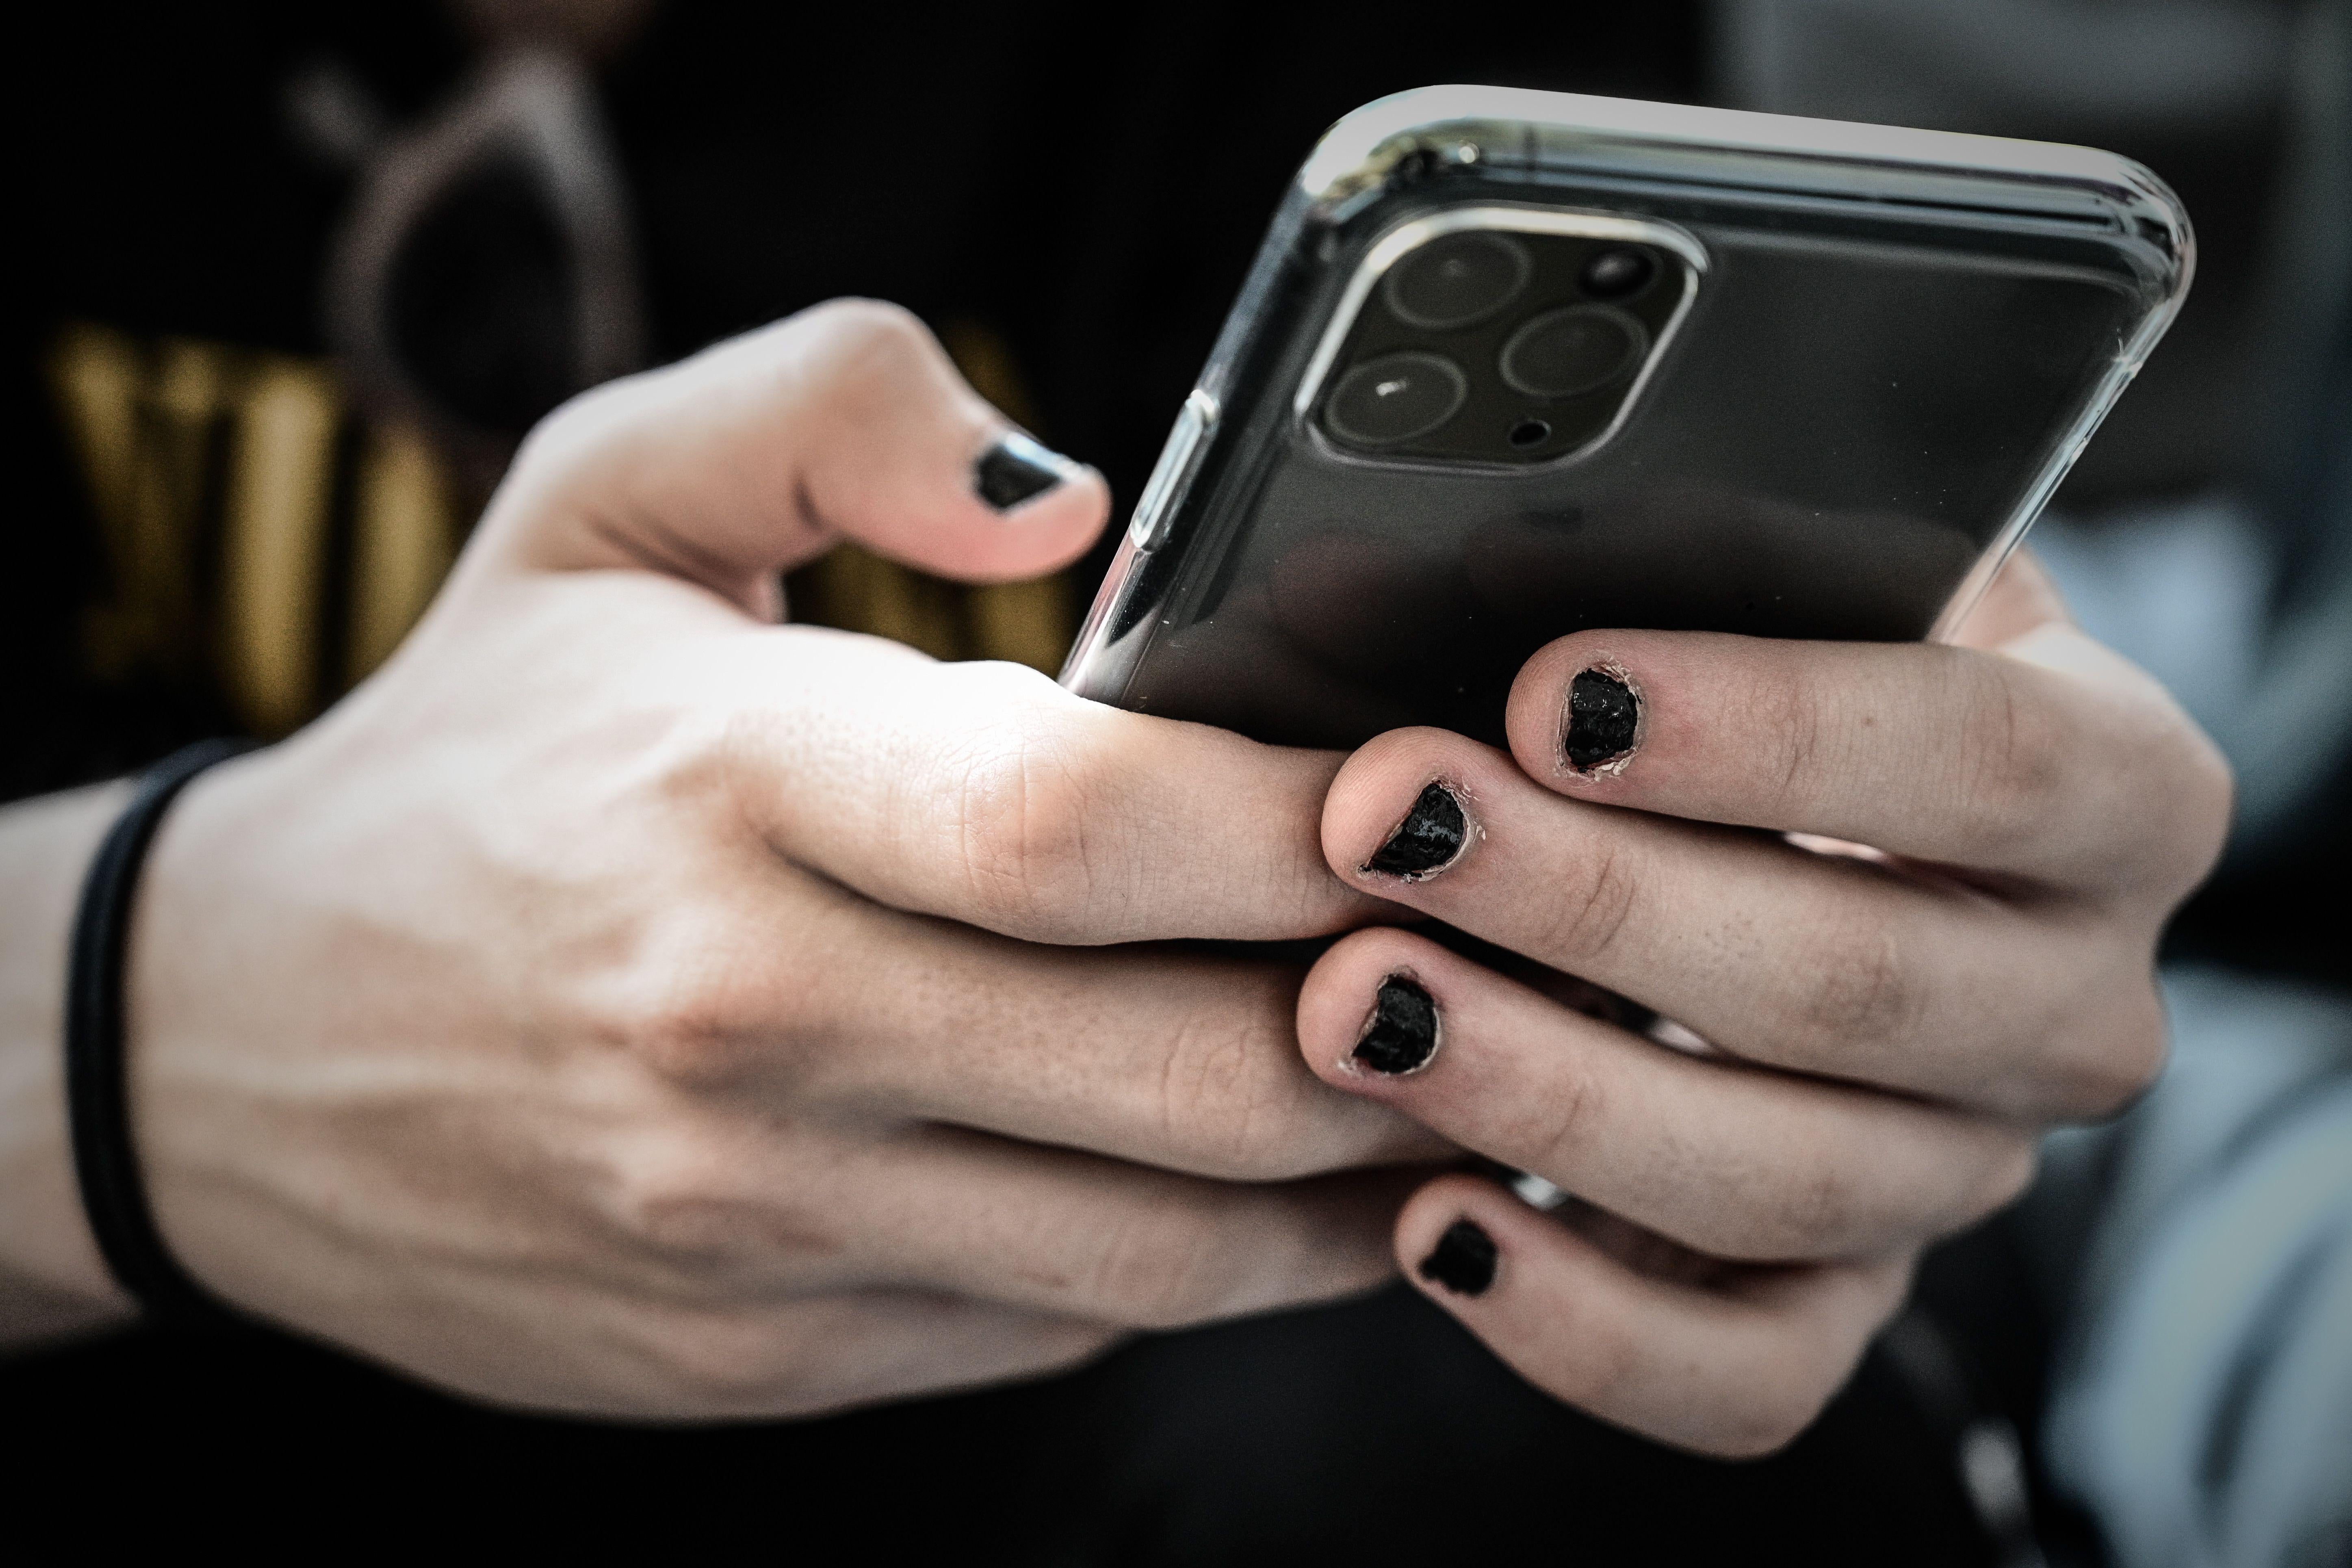 Two hands with black nail polish use an iPhone